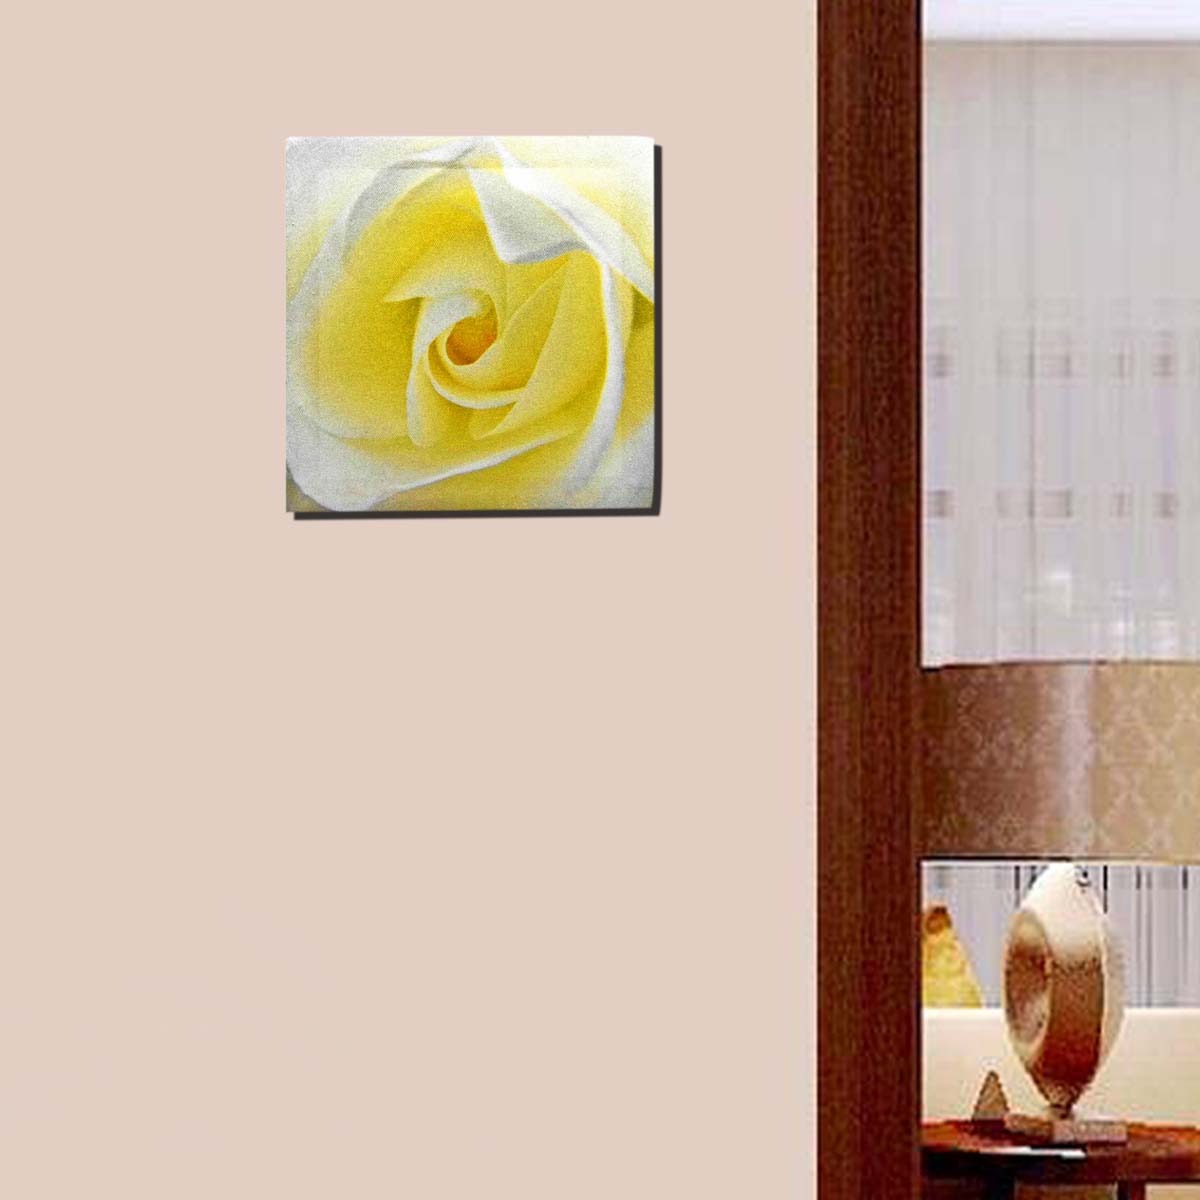 Kookee Canvas Modern Wall , Rose Painting for Home Living Room, Bedroom, Office Decor Ready to Hang (20cmx20cm) (F1-601161-4)